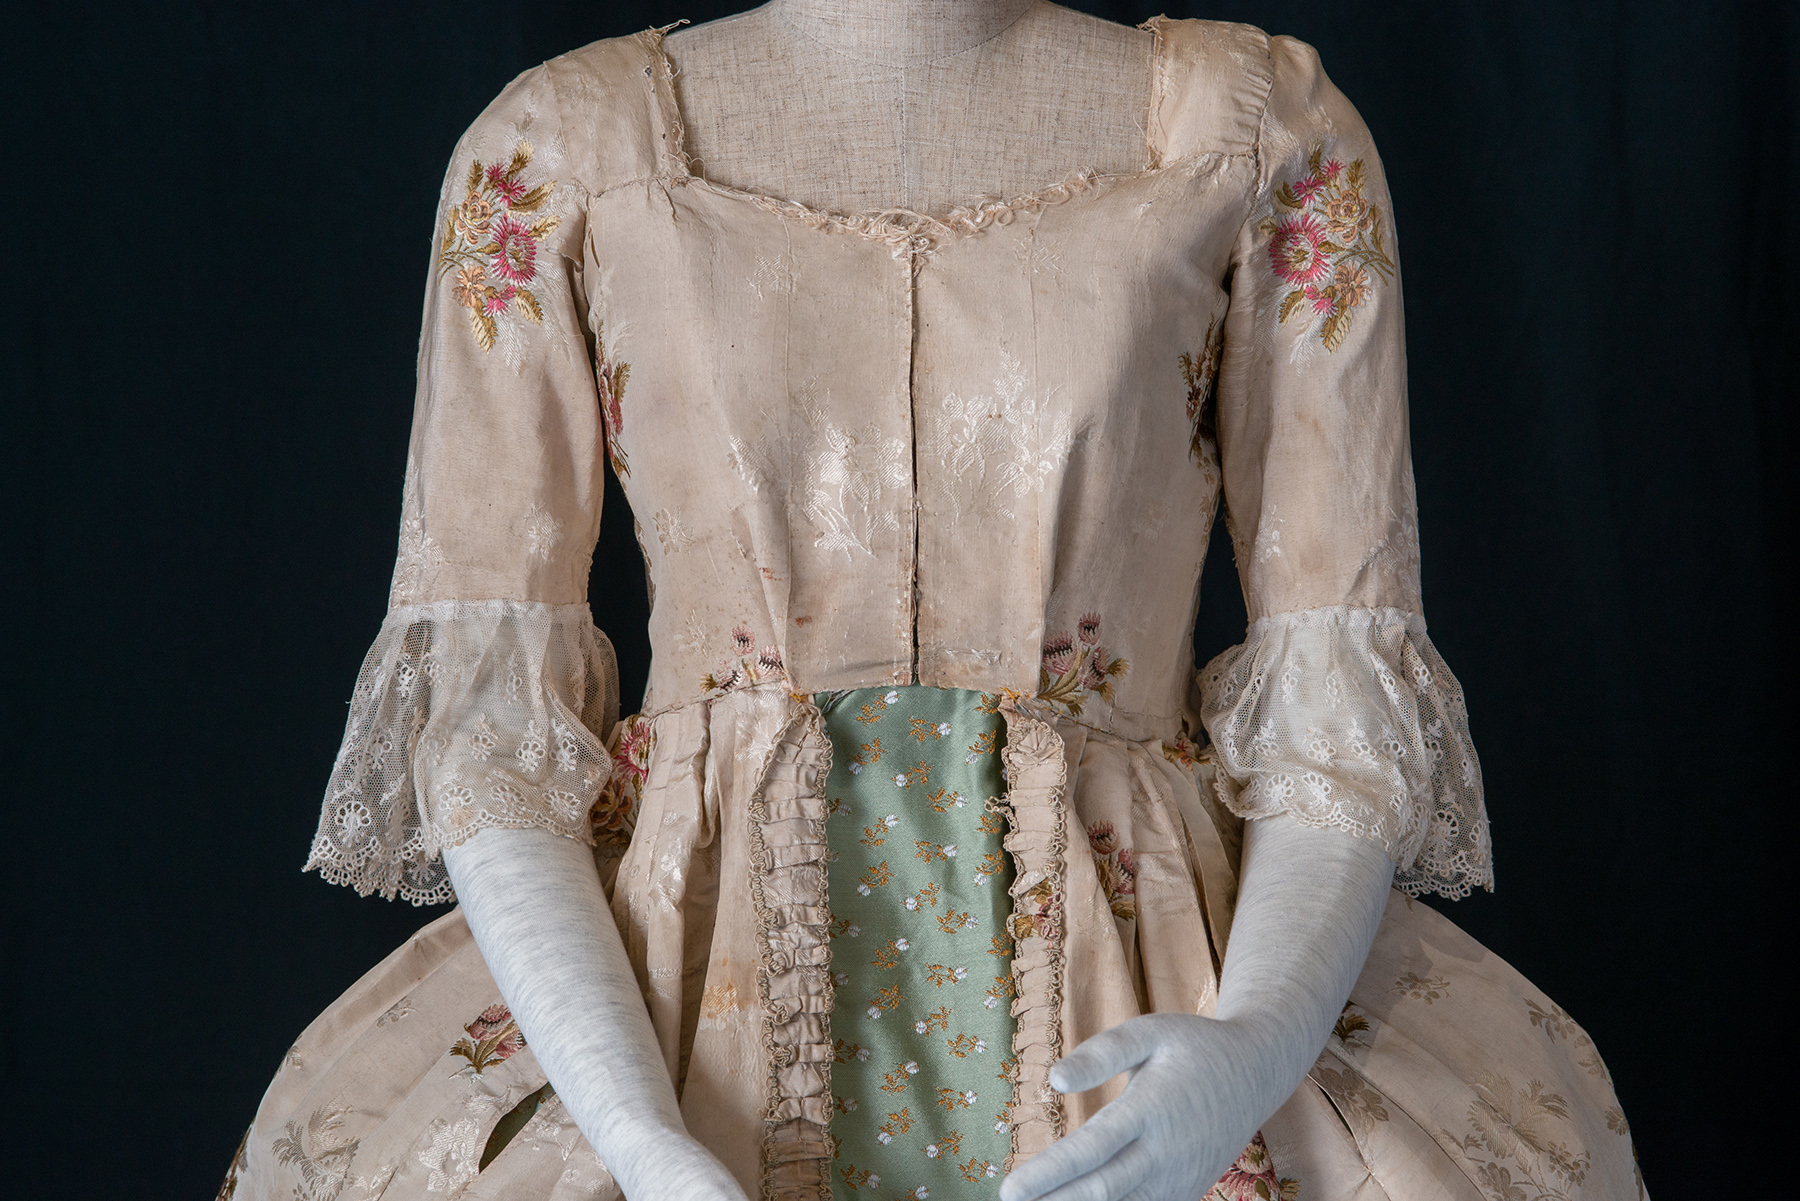 Detail of the Dress